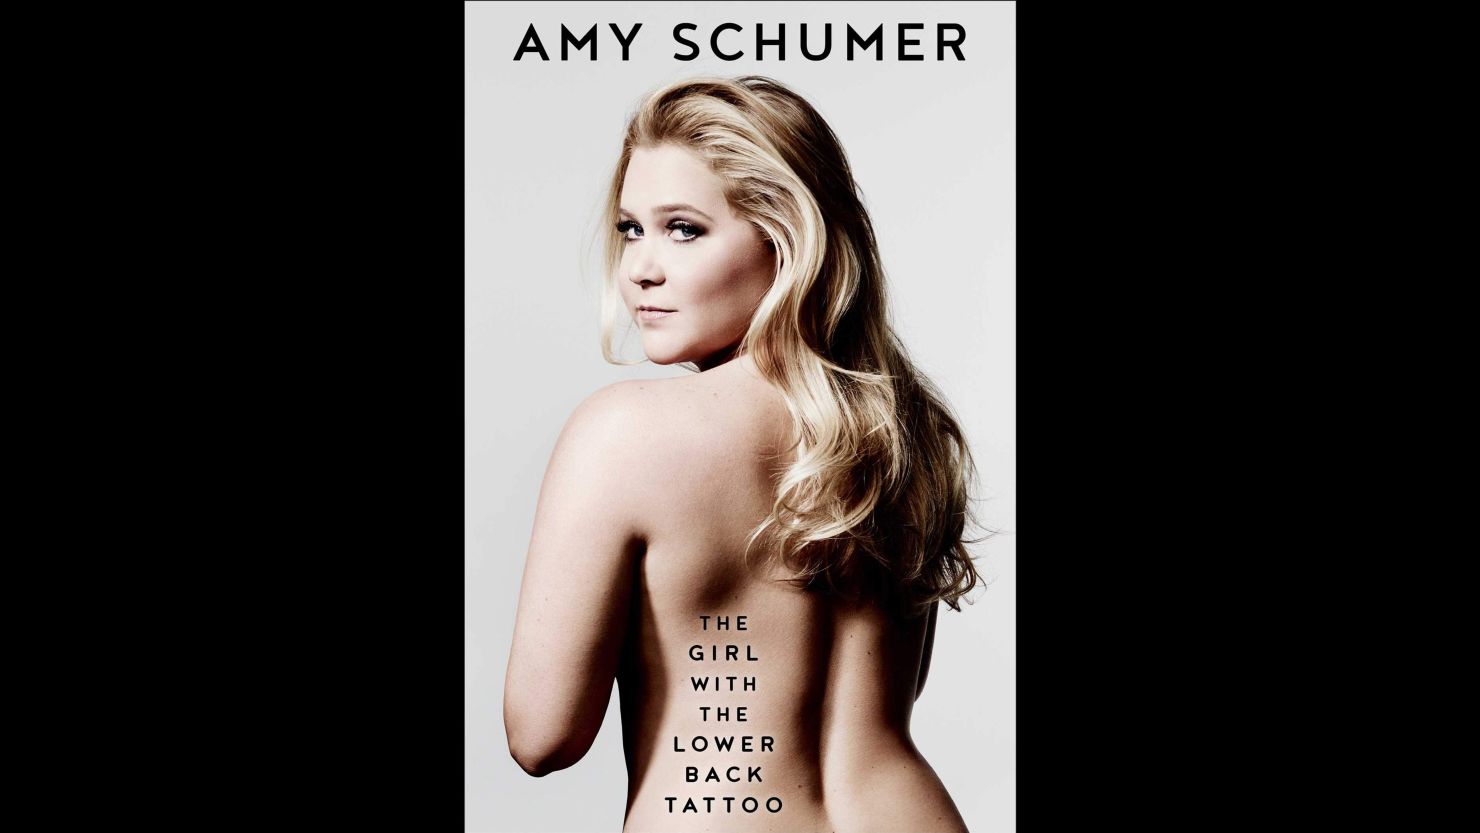 Amy Schumer' new biography is titled "The Girl with the Lower Back Tattoo."